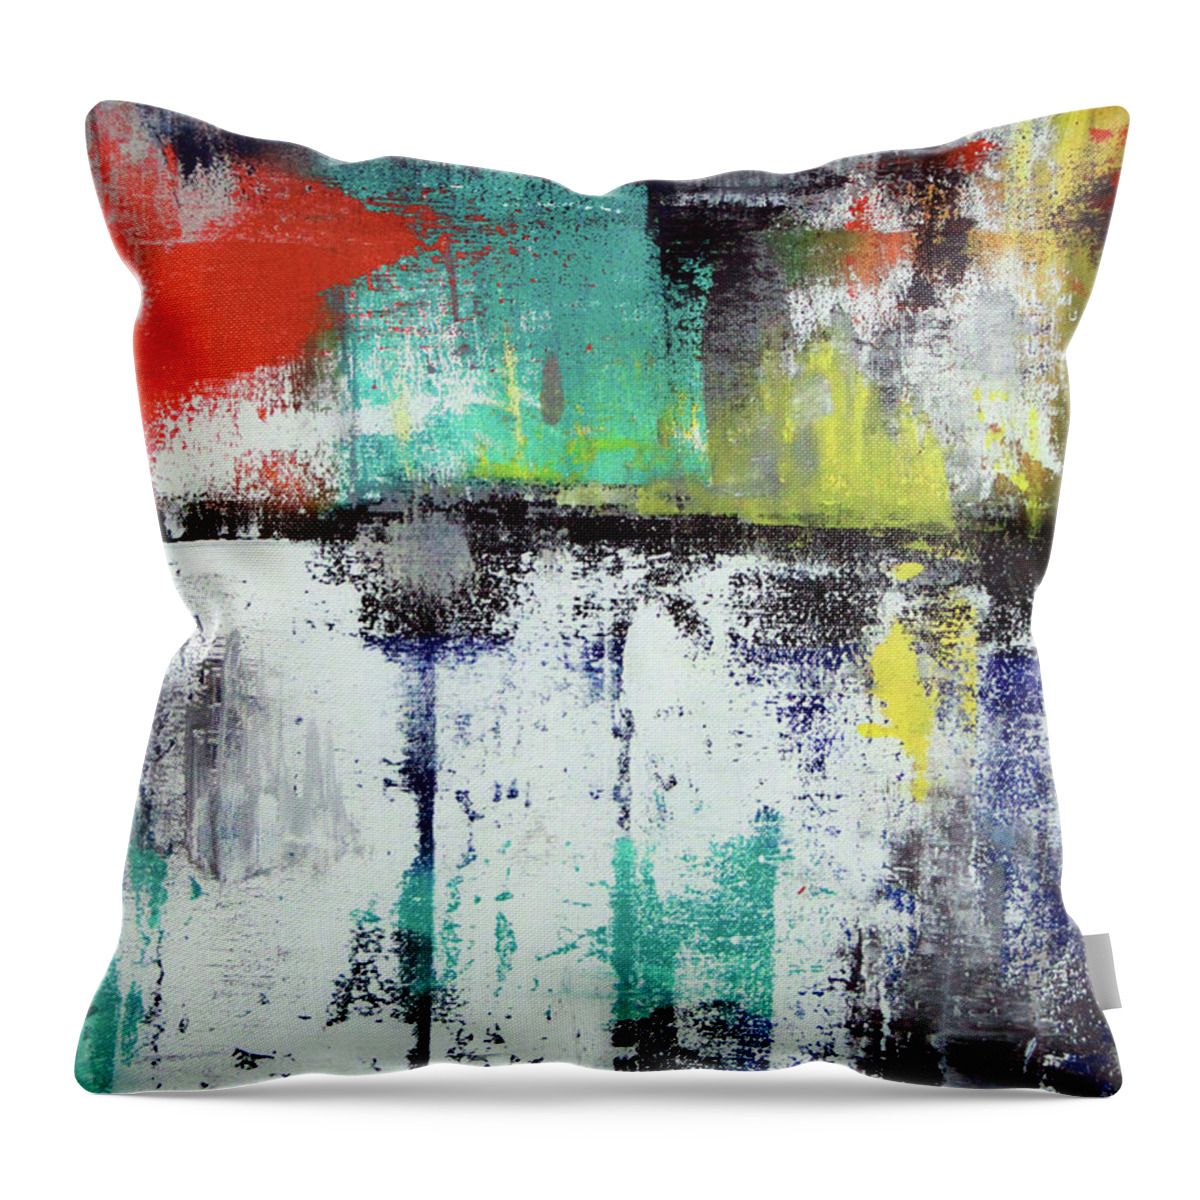 Abstract Throw Pillow featuring the painting Passing Through- Art by Linda Woods by Linda Woods